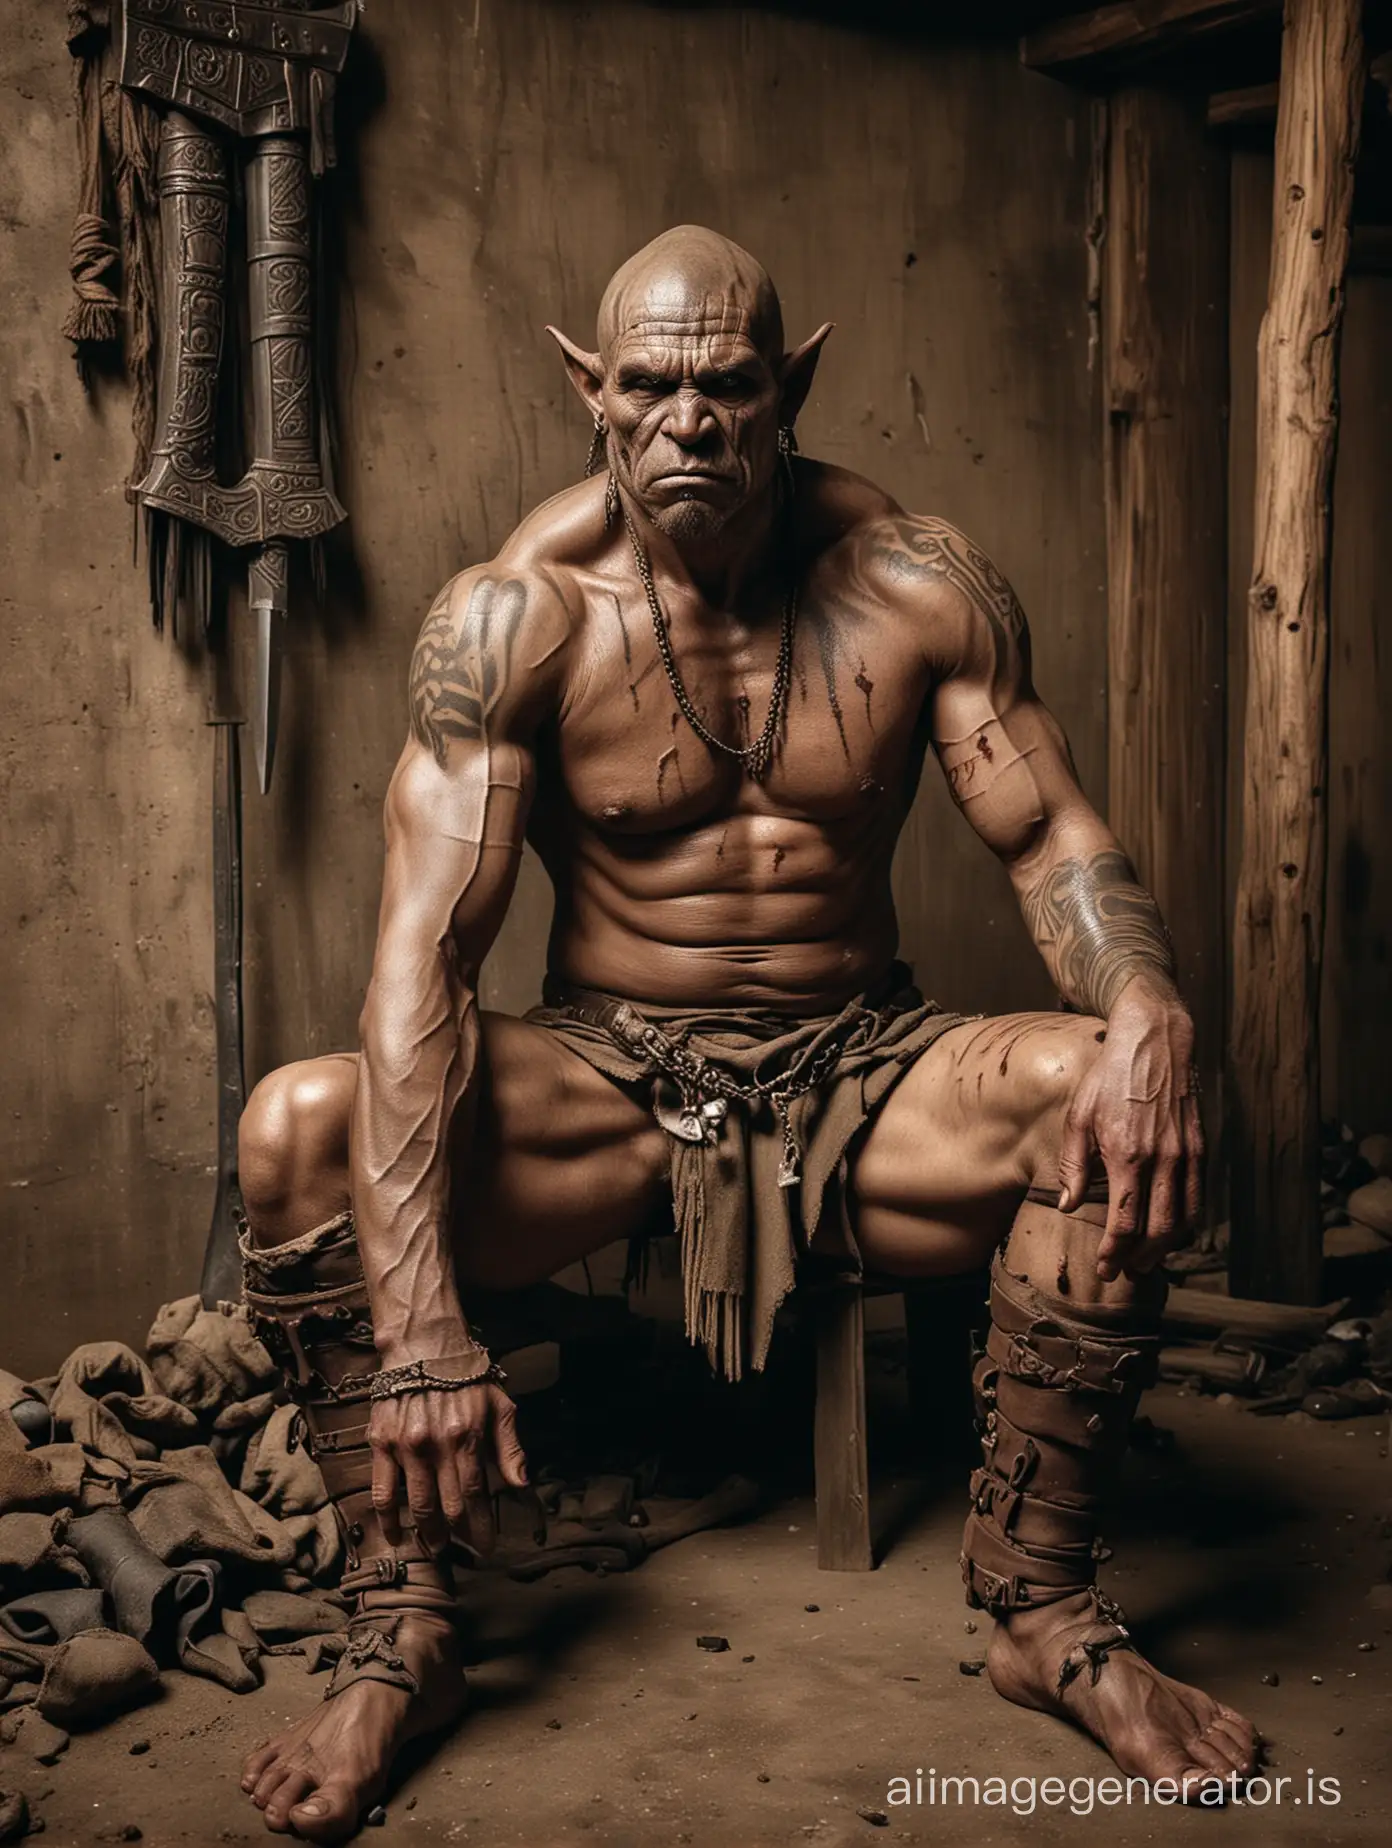 The battle scarred naked orc chieftain,sitting in his wooden hut,  contemplative. Looking down at the floor. His body, legs, arms, hands and feet are the same brown-greenish color of his face. One color for all skin. Skin is scarred and very dirty covered with dirt and blood and blood is on it. Tribal tattoos adorn his body. Armor on the wall. His battle axe resting against the wall. night. Gritty, dirty. wide angle shot, dramatic, dark, lighting from torches in the corners and a fire in the hearth. Lonely. The trophies of his battles on the wall. Food on the dirt floor. HIgh contrast